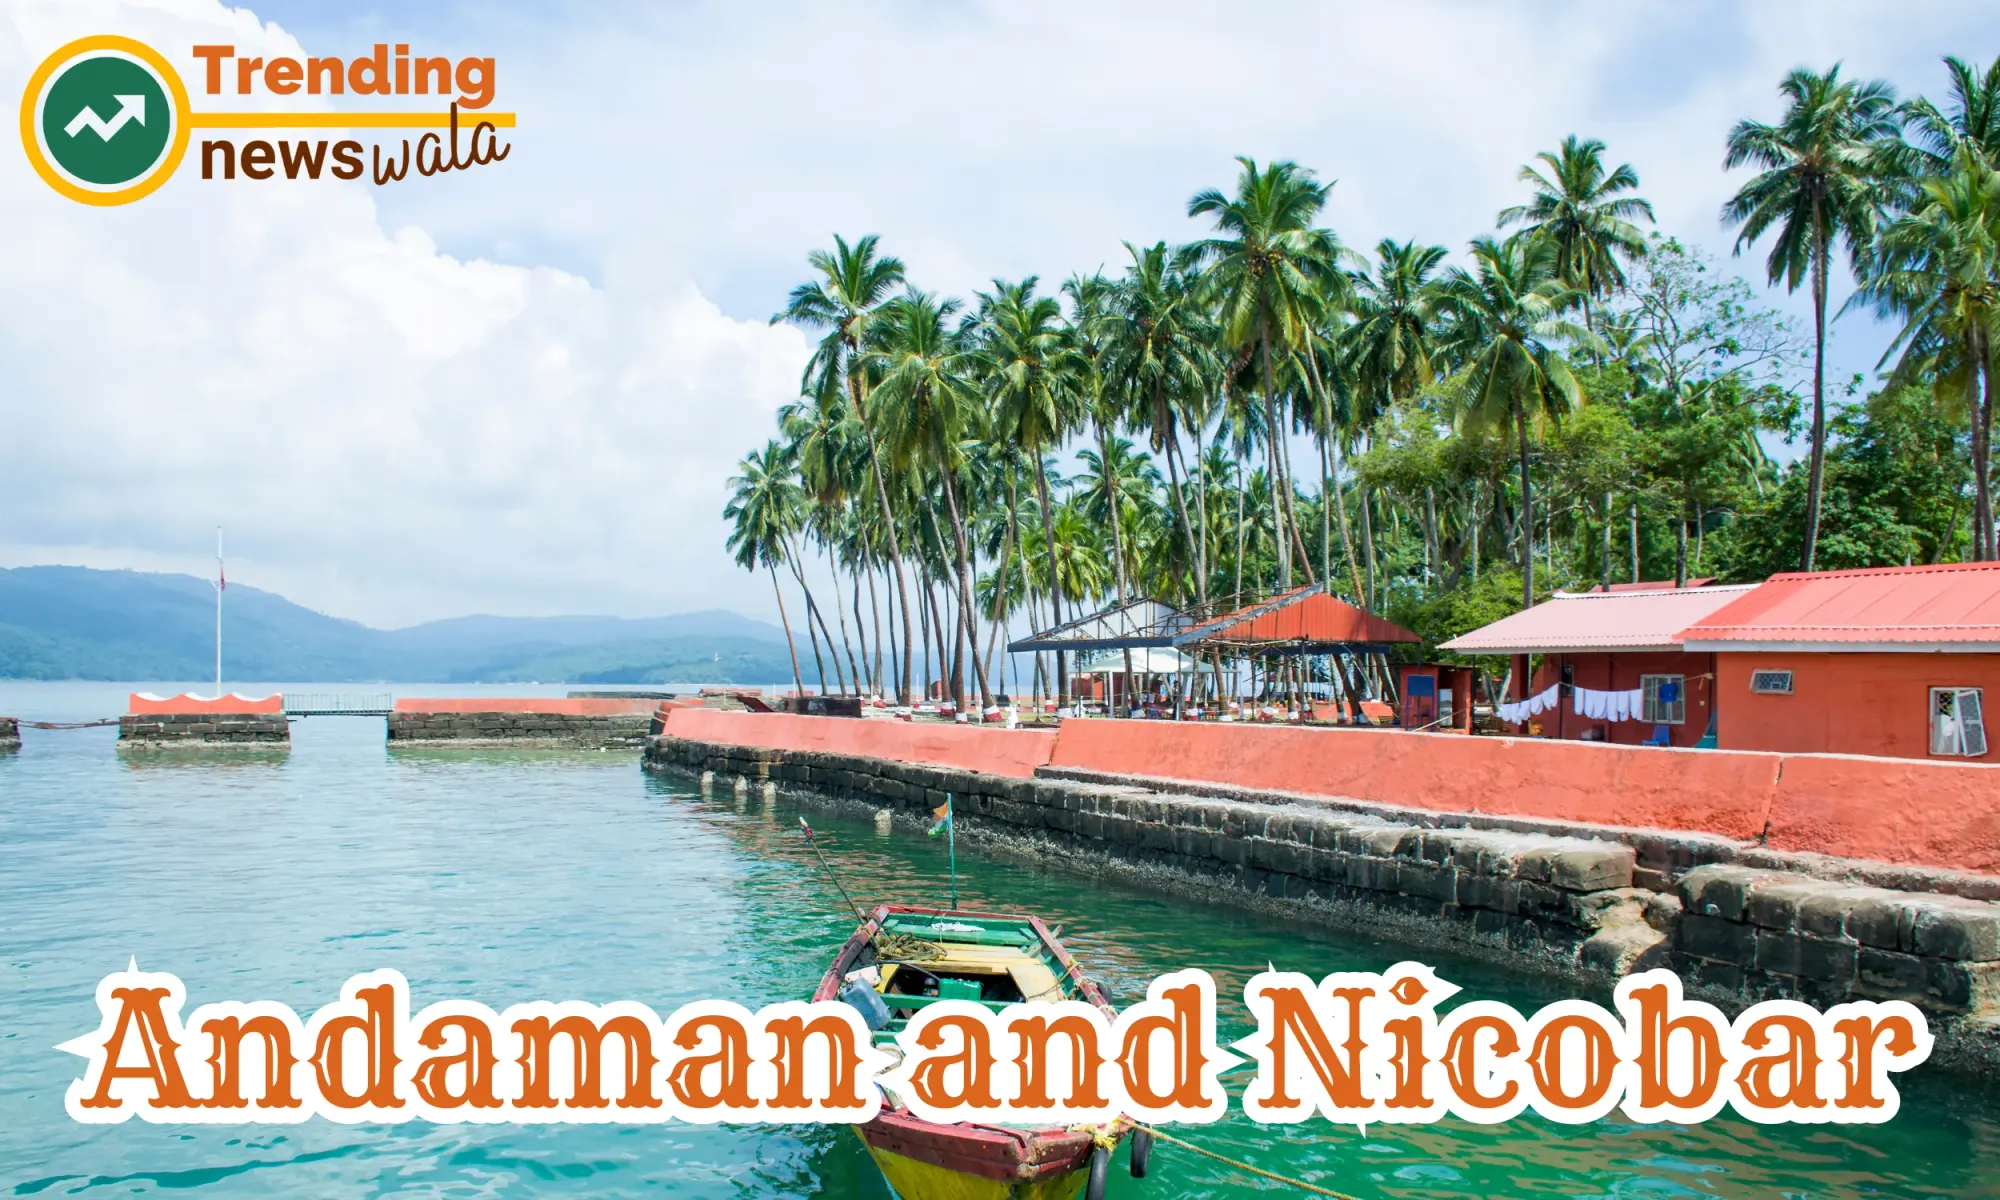 The Andaman and Nicobar Islands are a group of islands